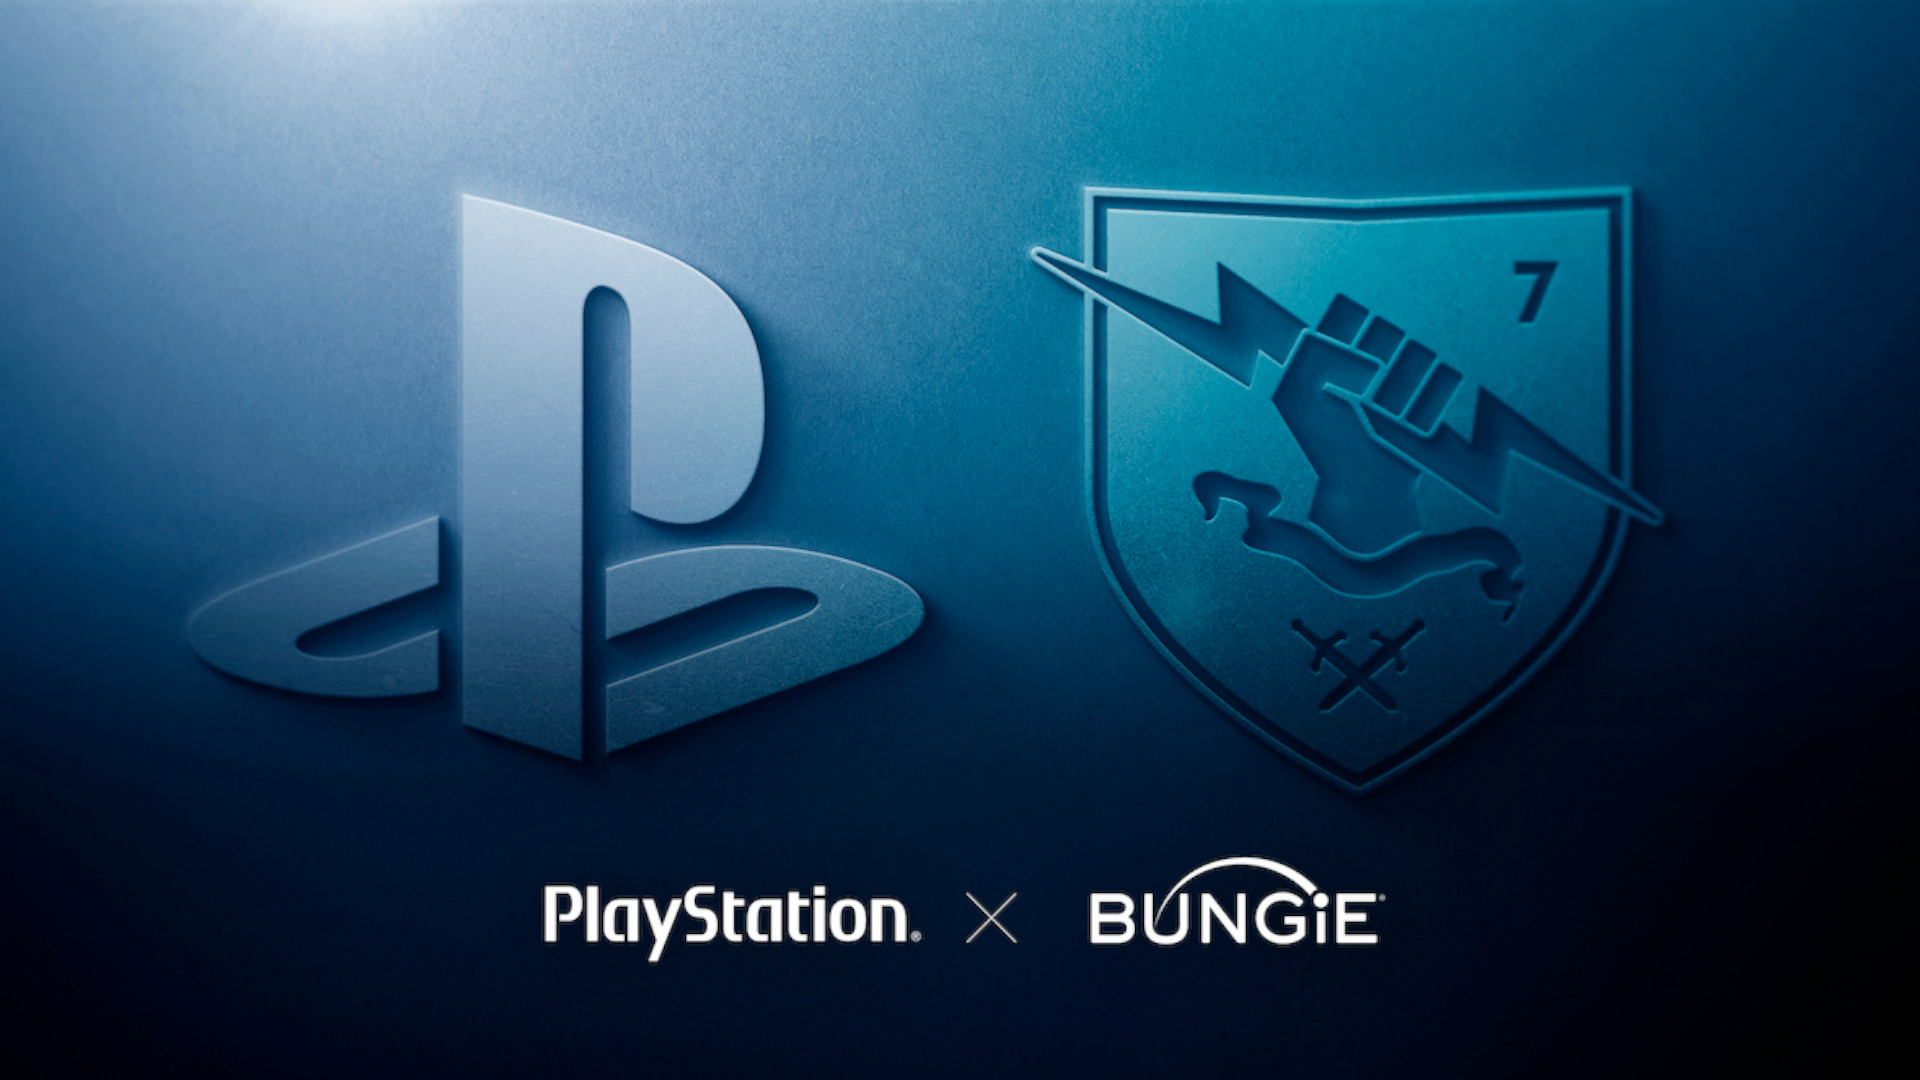 Sony is buying Bungie, but Destiny will stay multiplatform